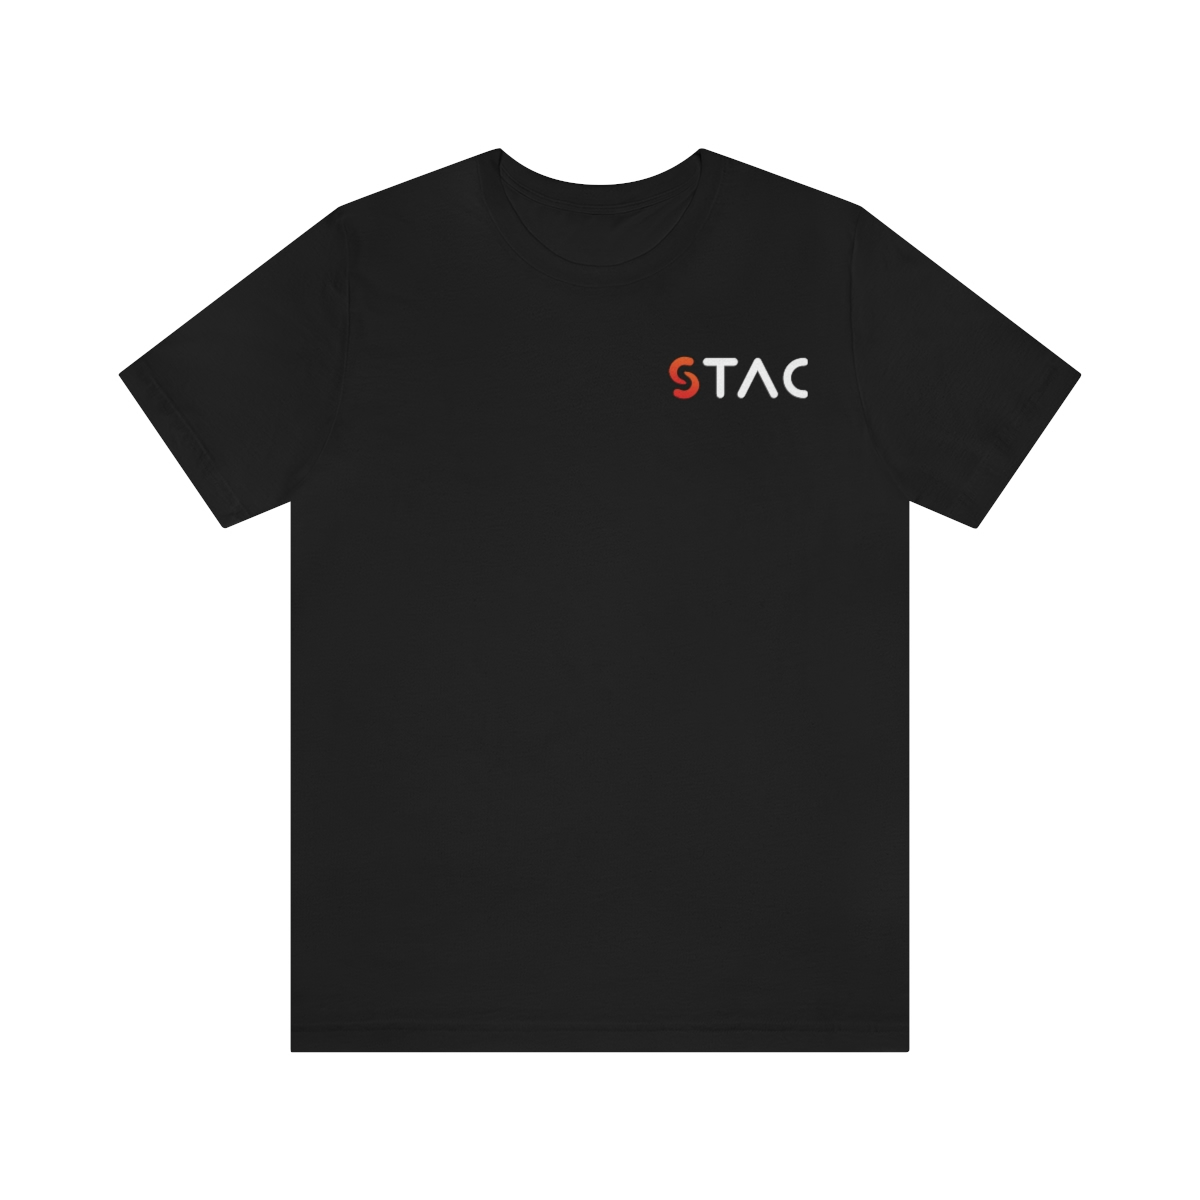 Front view of a black t-shirt with stylized "STAC" over the left breast.